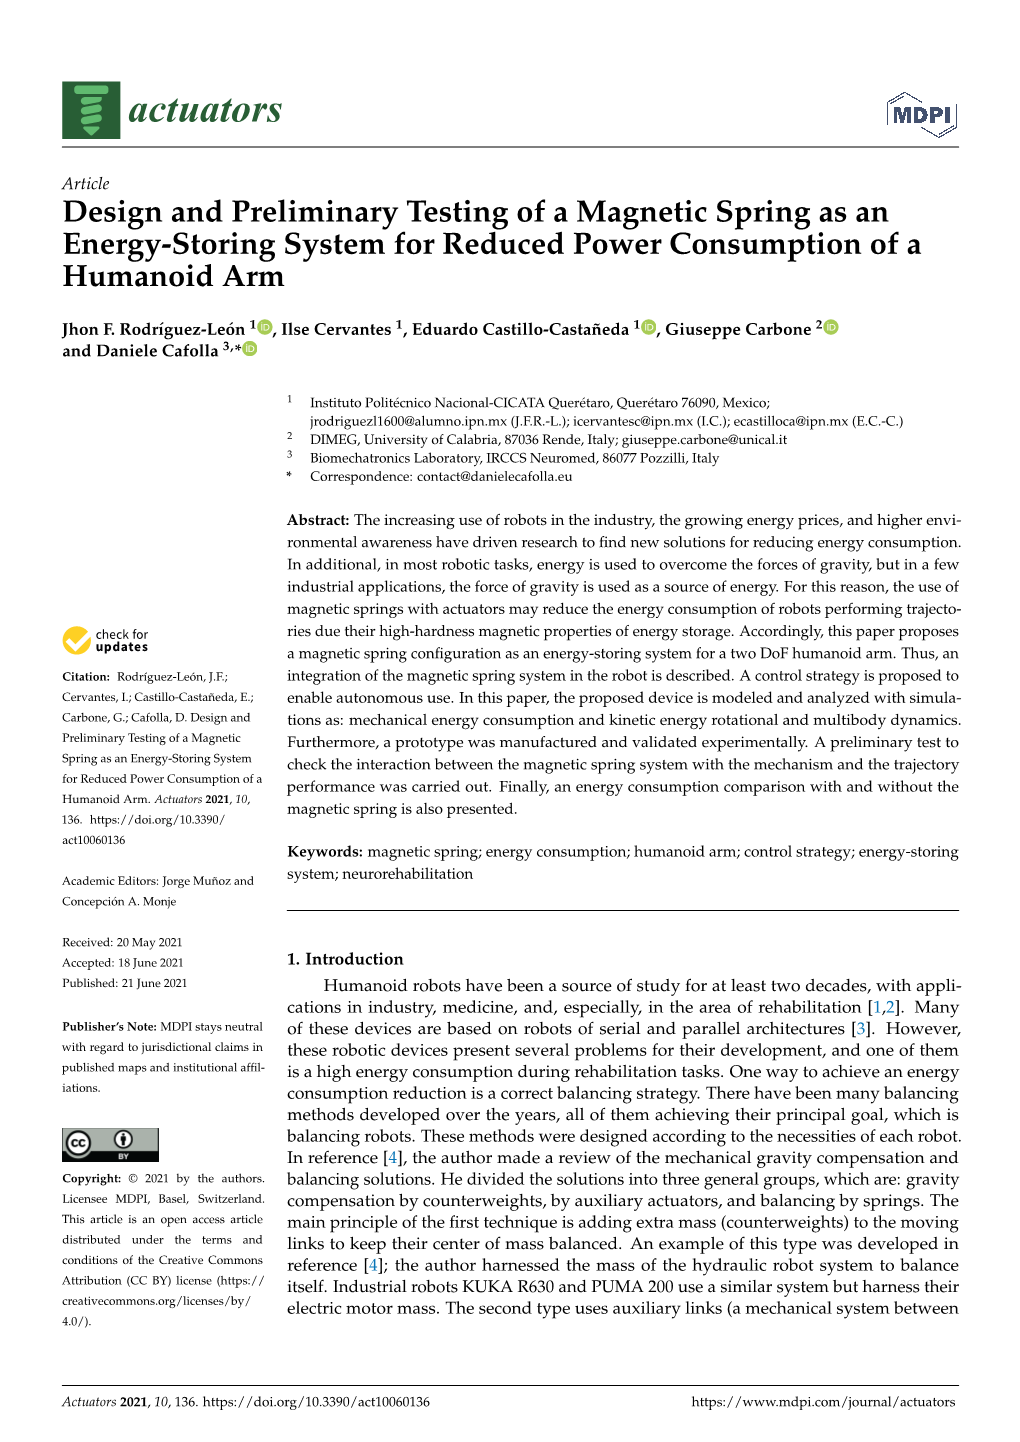 Design and Preliminary Testing of a Magnetic Spring As an Energy-Storing System for Reduced Power Consumption of a Humanoid Arm